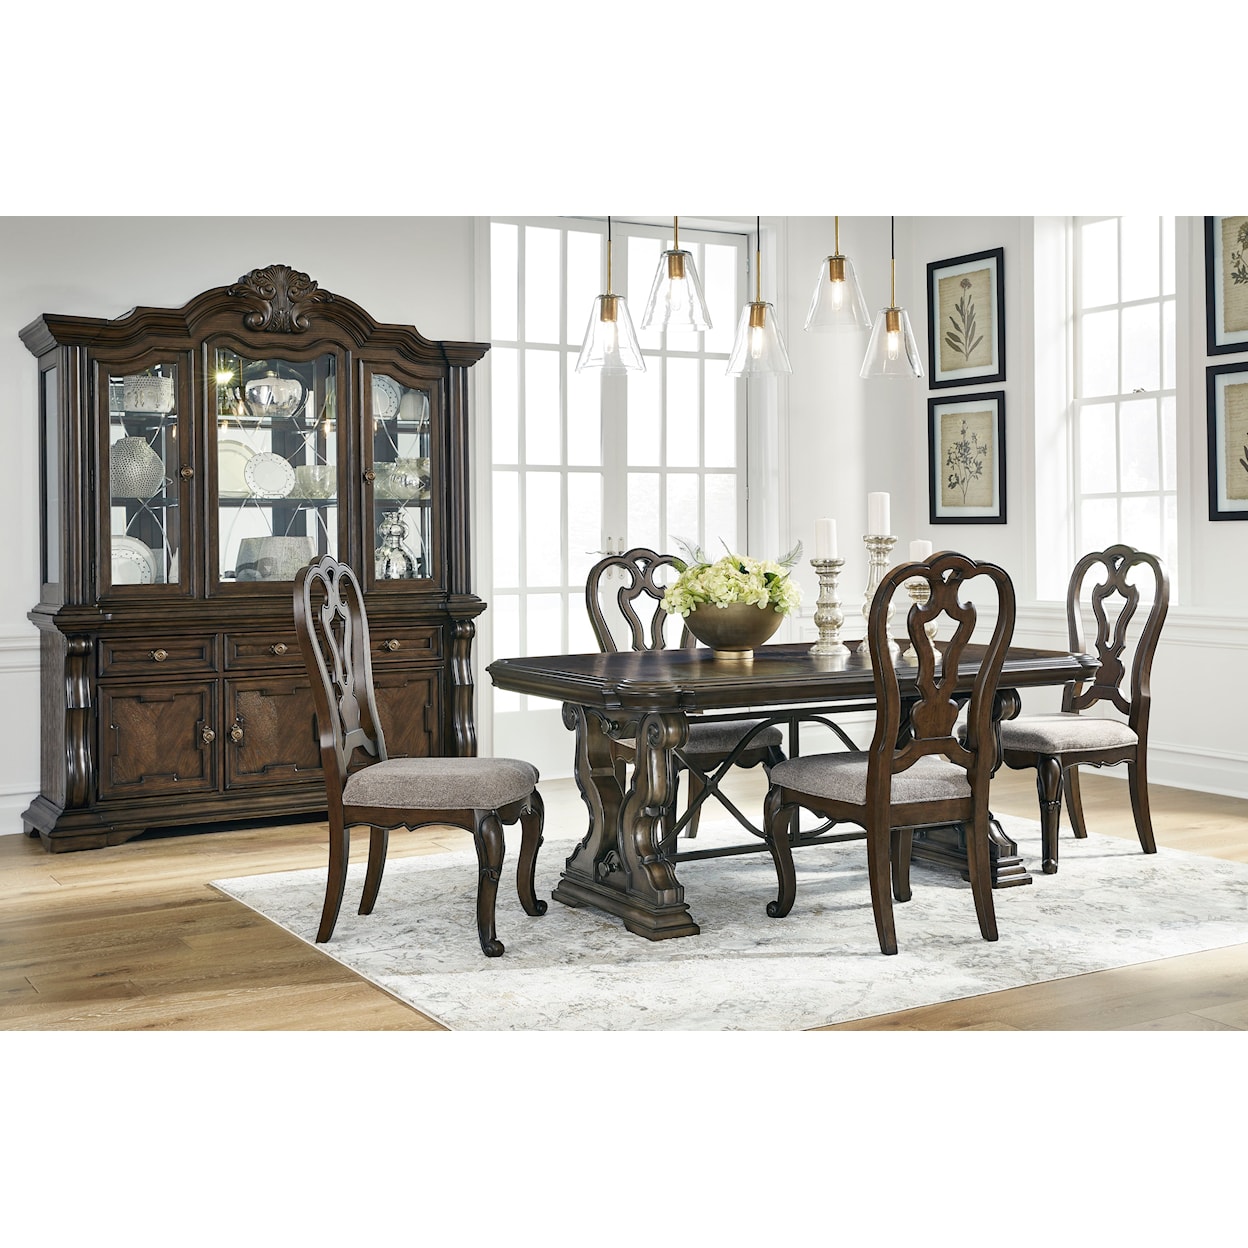 Signature Design by Ashley Maylee Dining Set